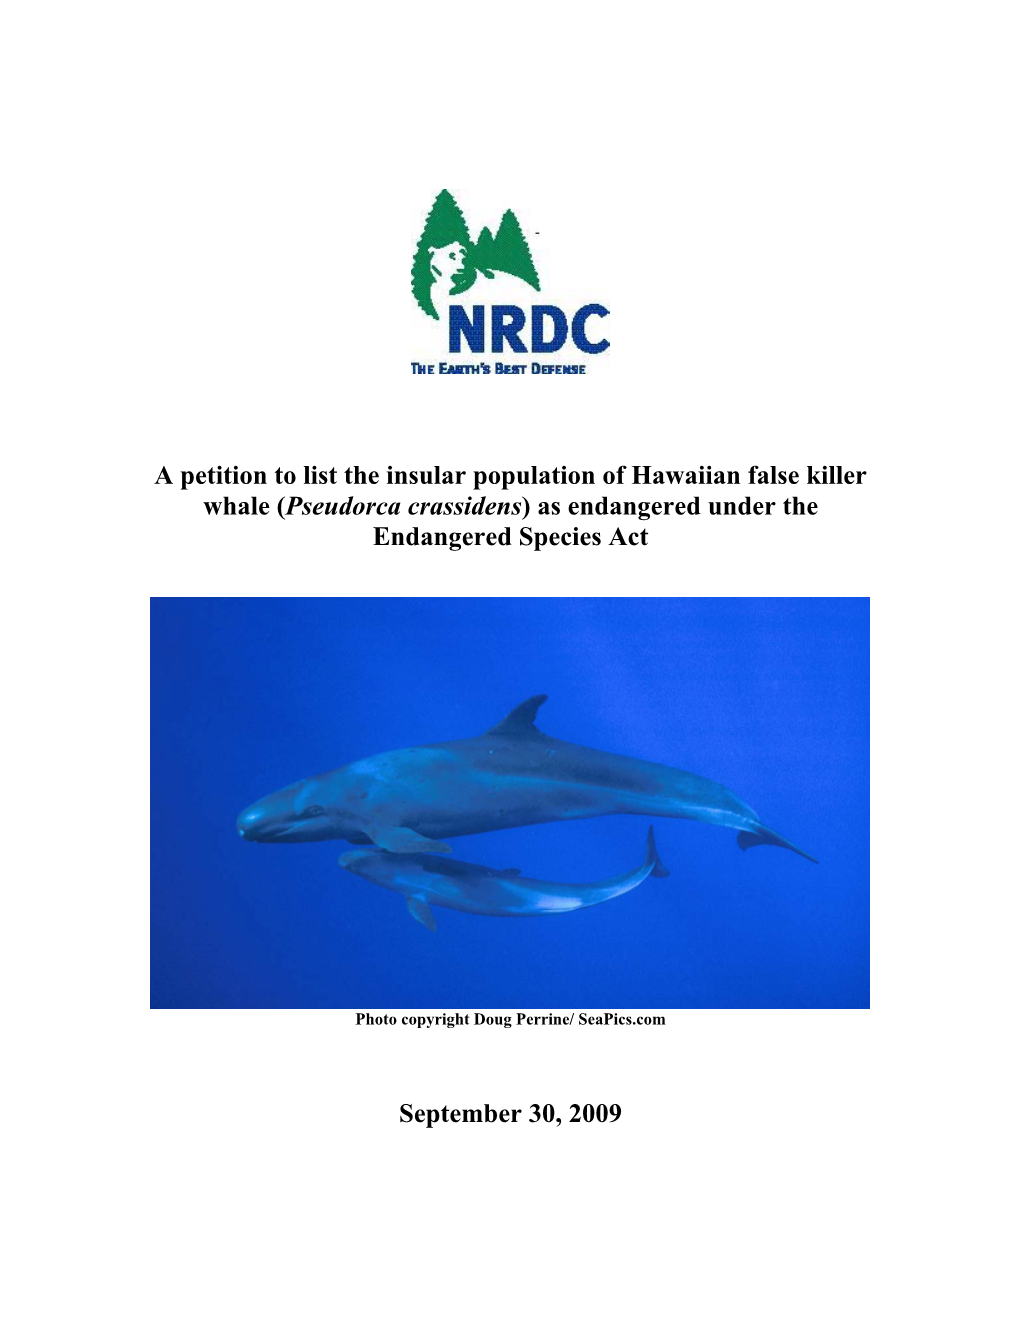 A Petition to List the Insular Population of Hawaiian False Killer Whale (Pseudorca Crassidens) As Endangered Under the Endangered Species Act